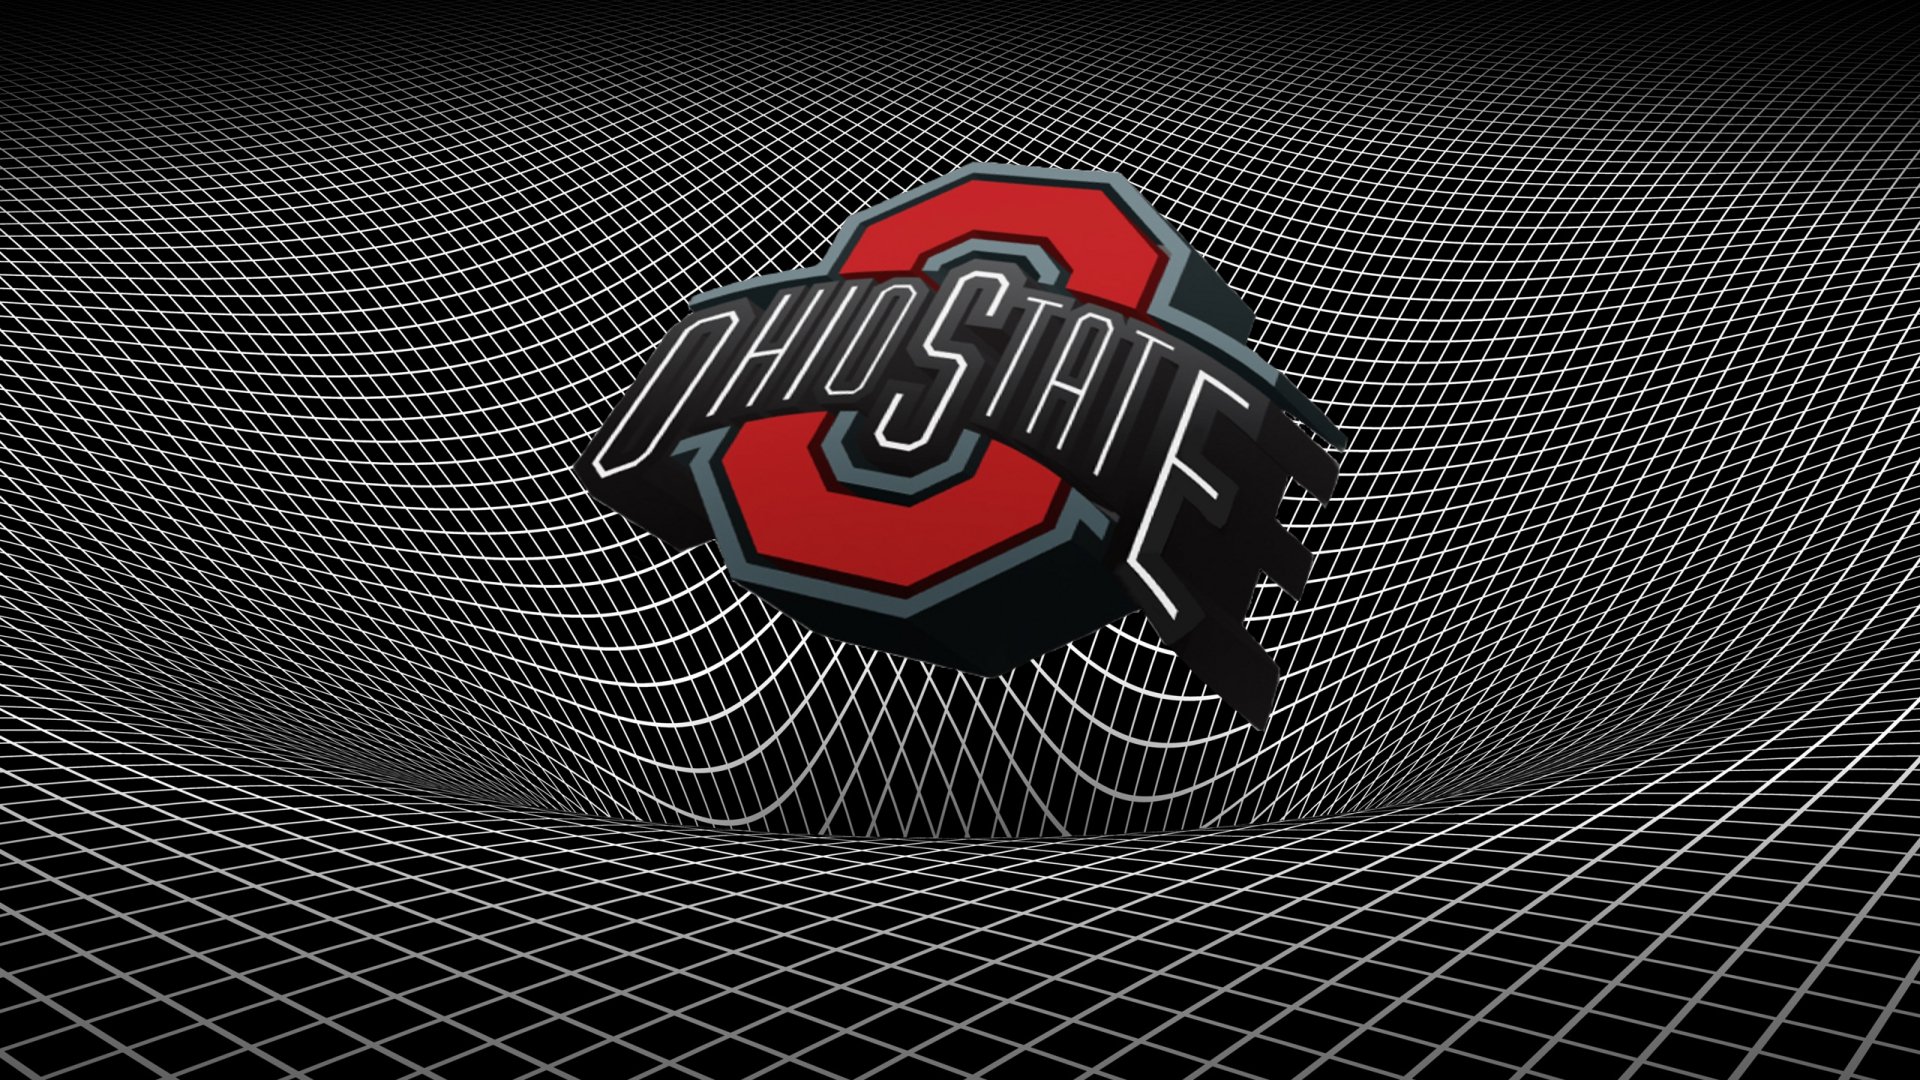 Ohio State Buckeyes College Football Poster Wallpaper